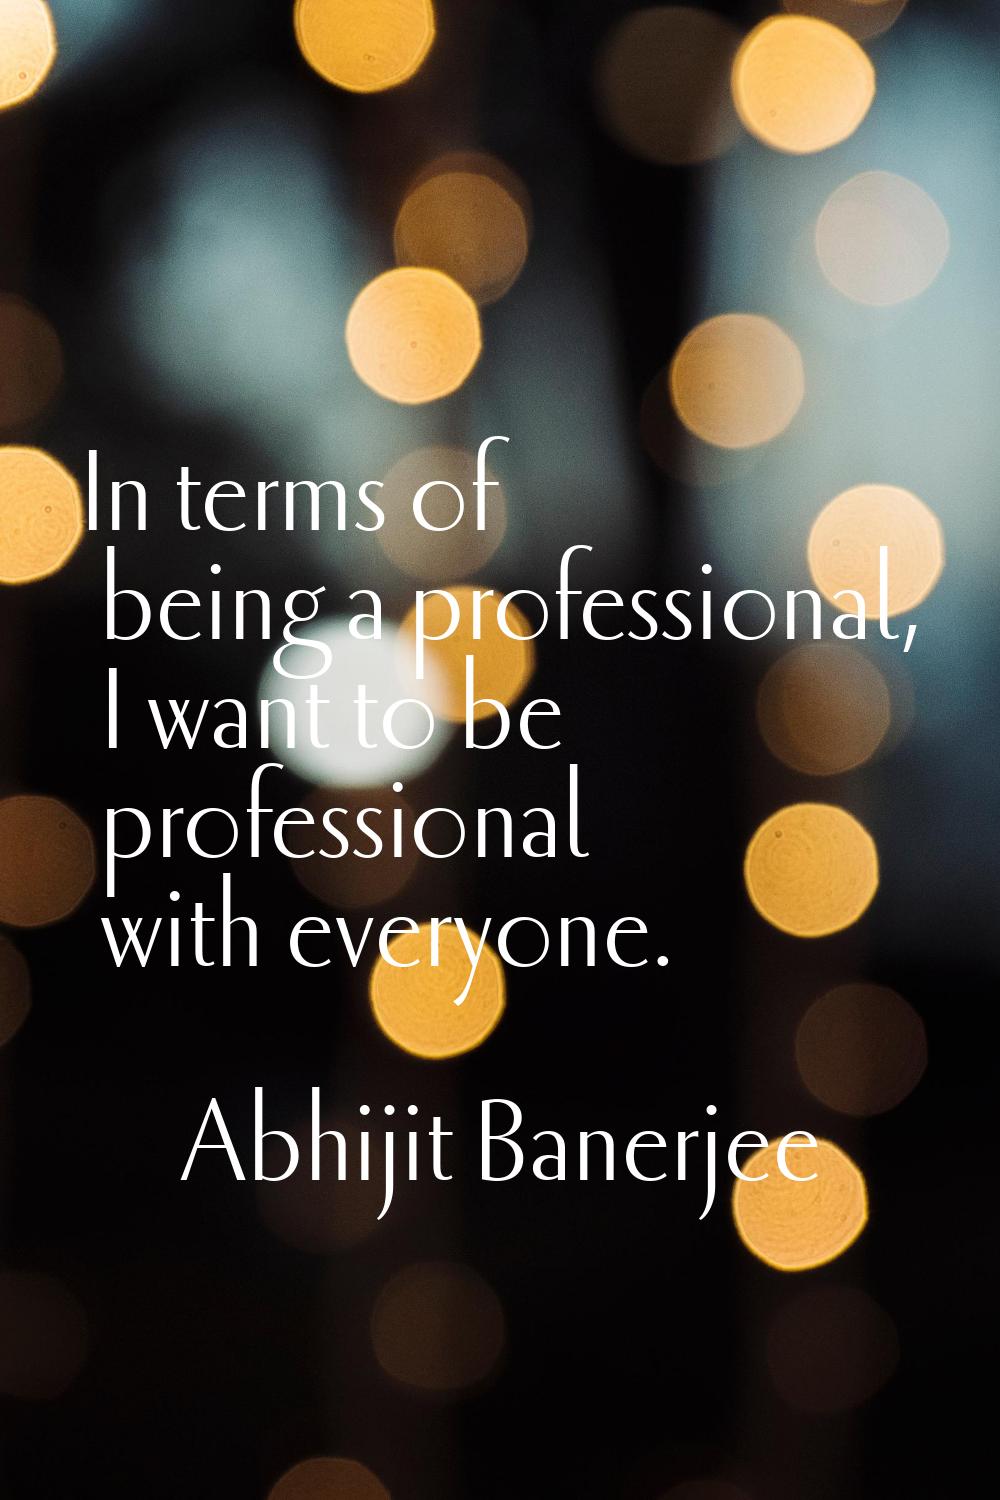 In terms of being a professional, I want to be professional with everyone.